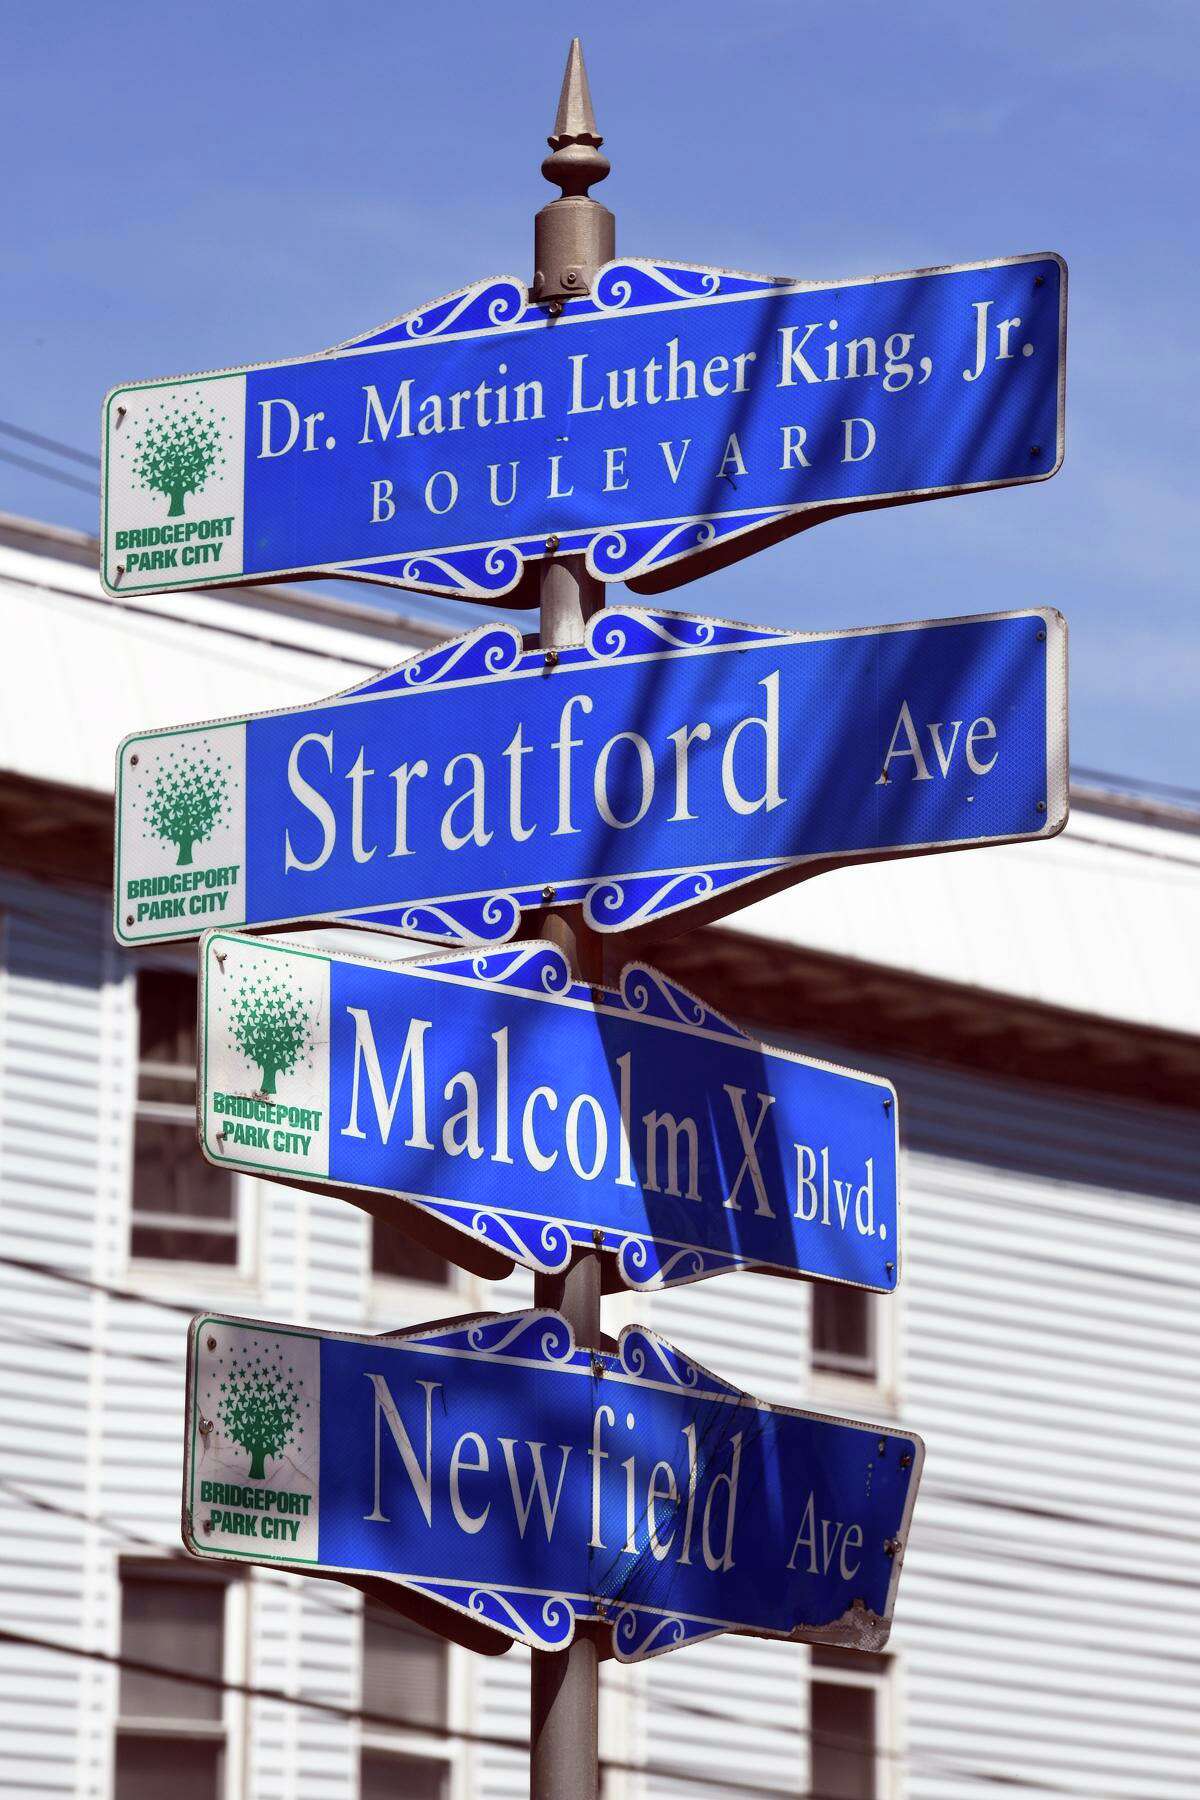 The intersection of Stratford Ave. and Newfield Ave., in Bridgeport, Conn. June 30, 2022.